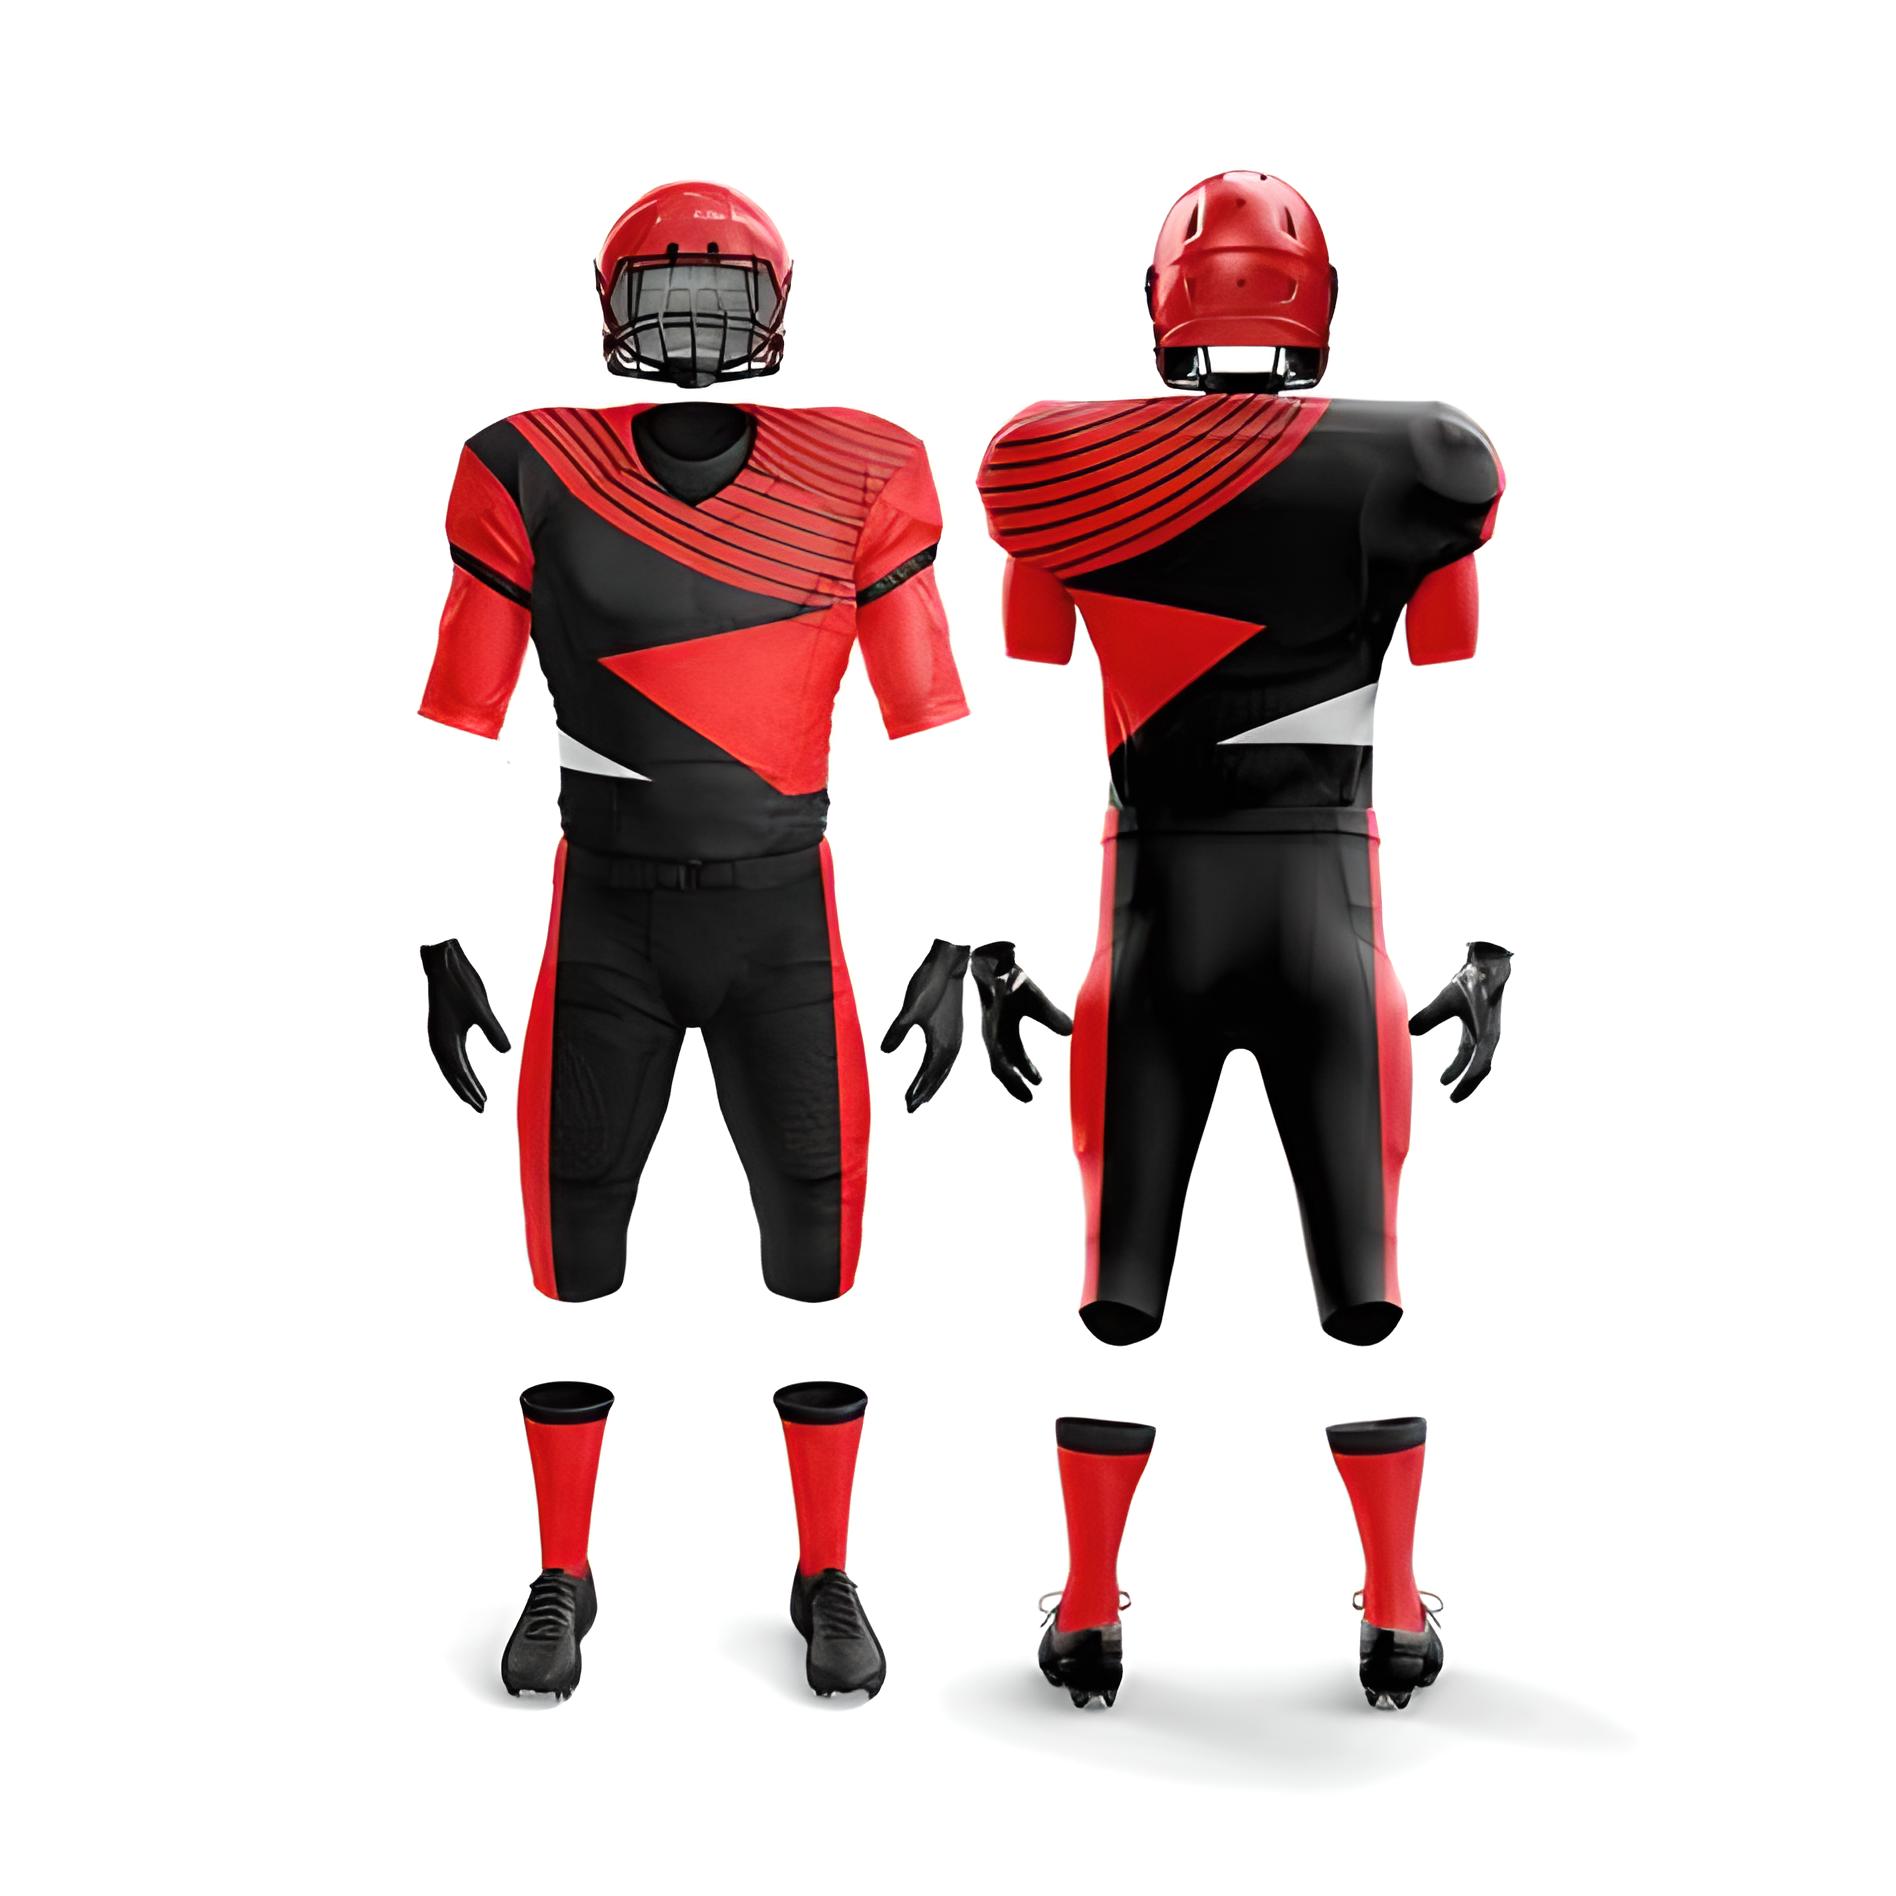 football team complete kits and uniforms